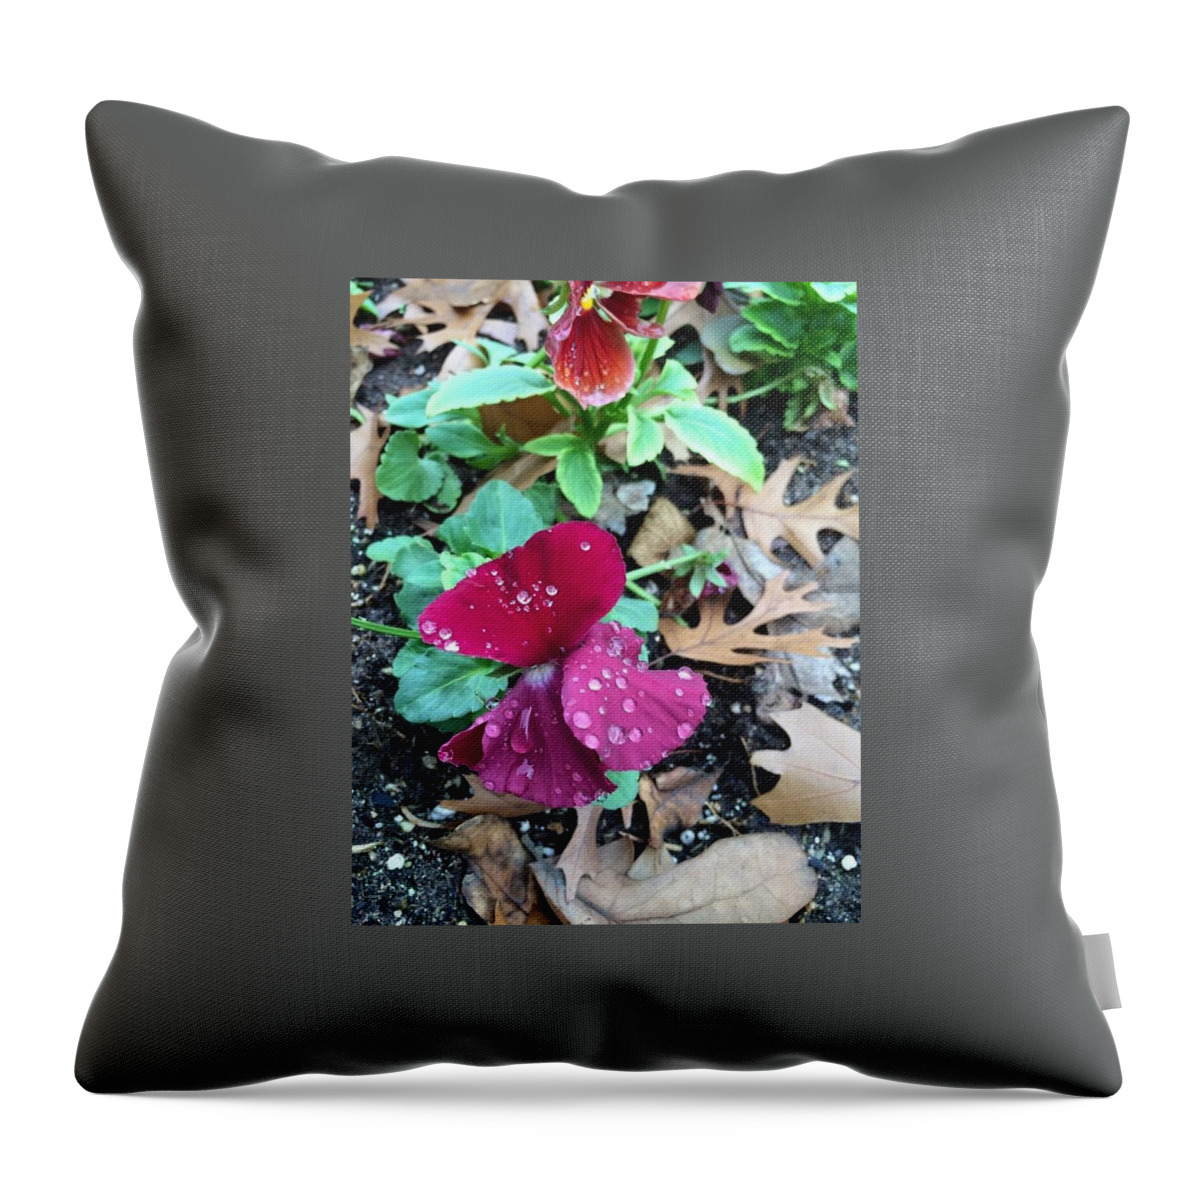  Throw Pillow featuring the photograph The beauty of nature by Kristen Holt